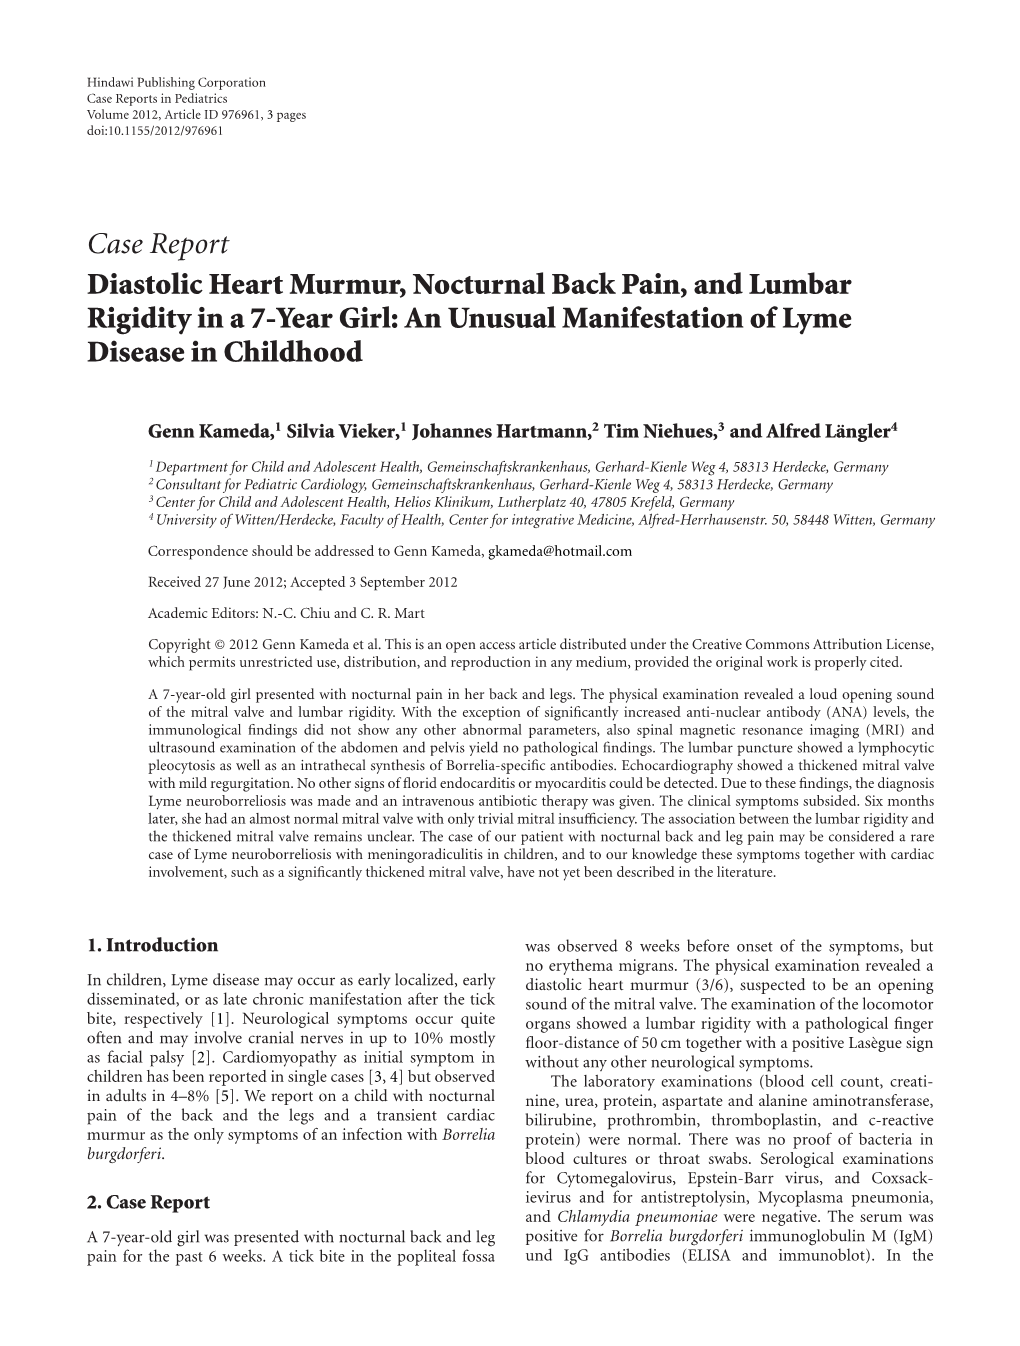 Diastolic Heart Murmur, Nocturnal Back Pain, and Lumbar Rigidity in a 7-Year Girl: an Unusual Manifestation of Lyme Disease in Childhood